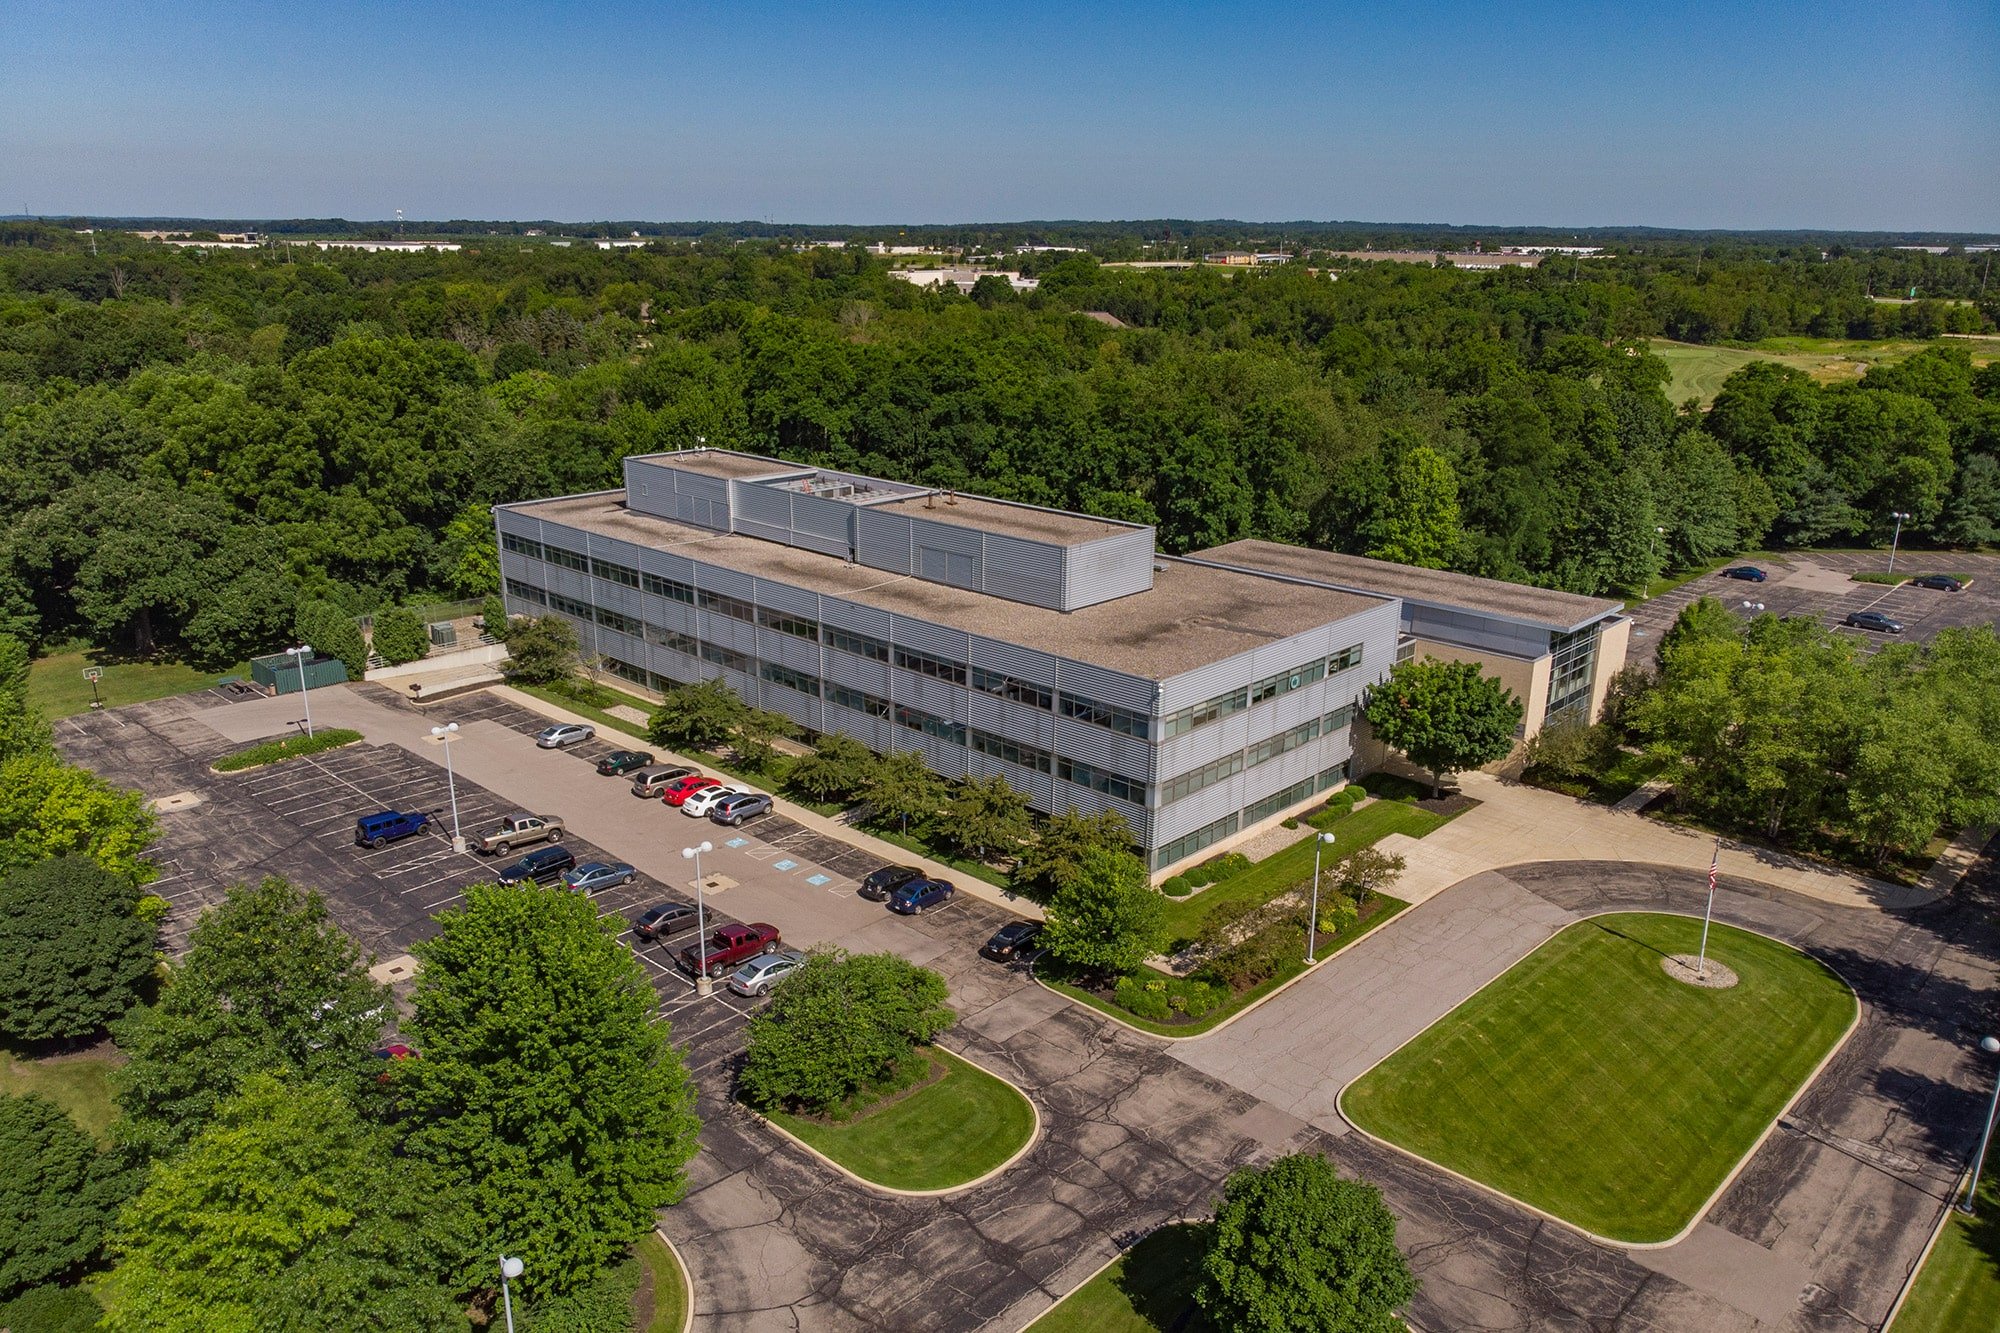 Sturges Property Group - Blackthorn Corporate Park at 3575 Moreau Court in South Bend, IN.